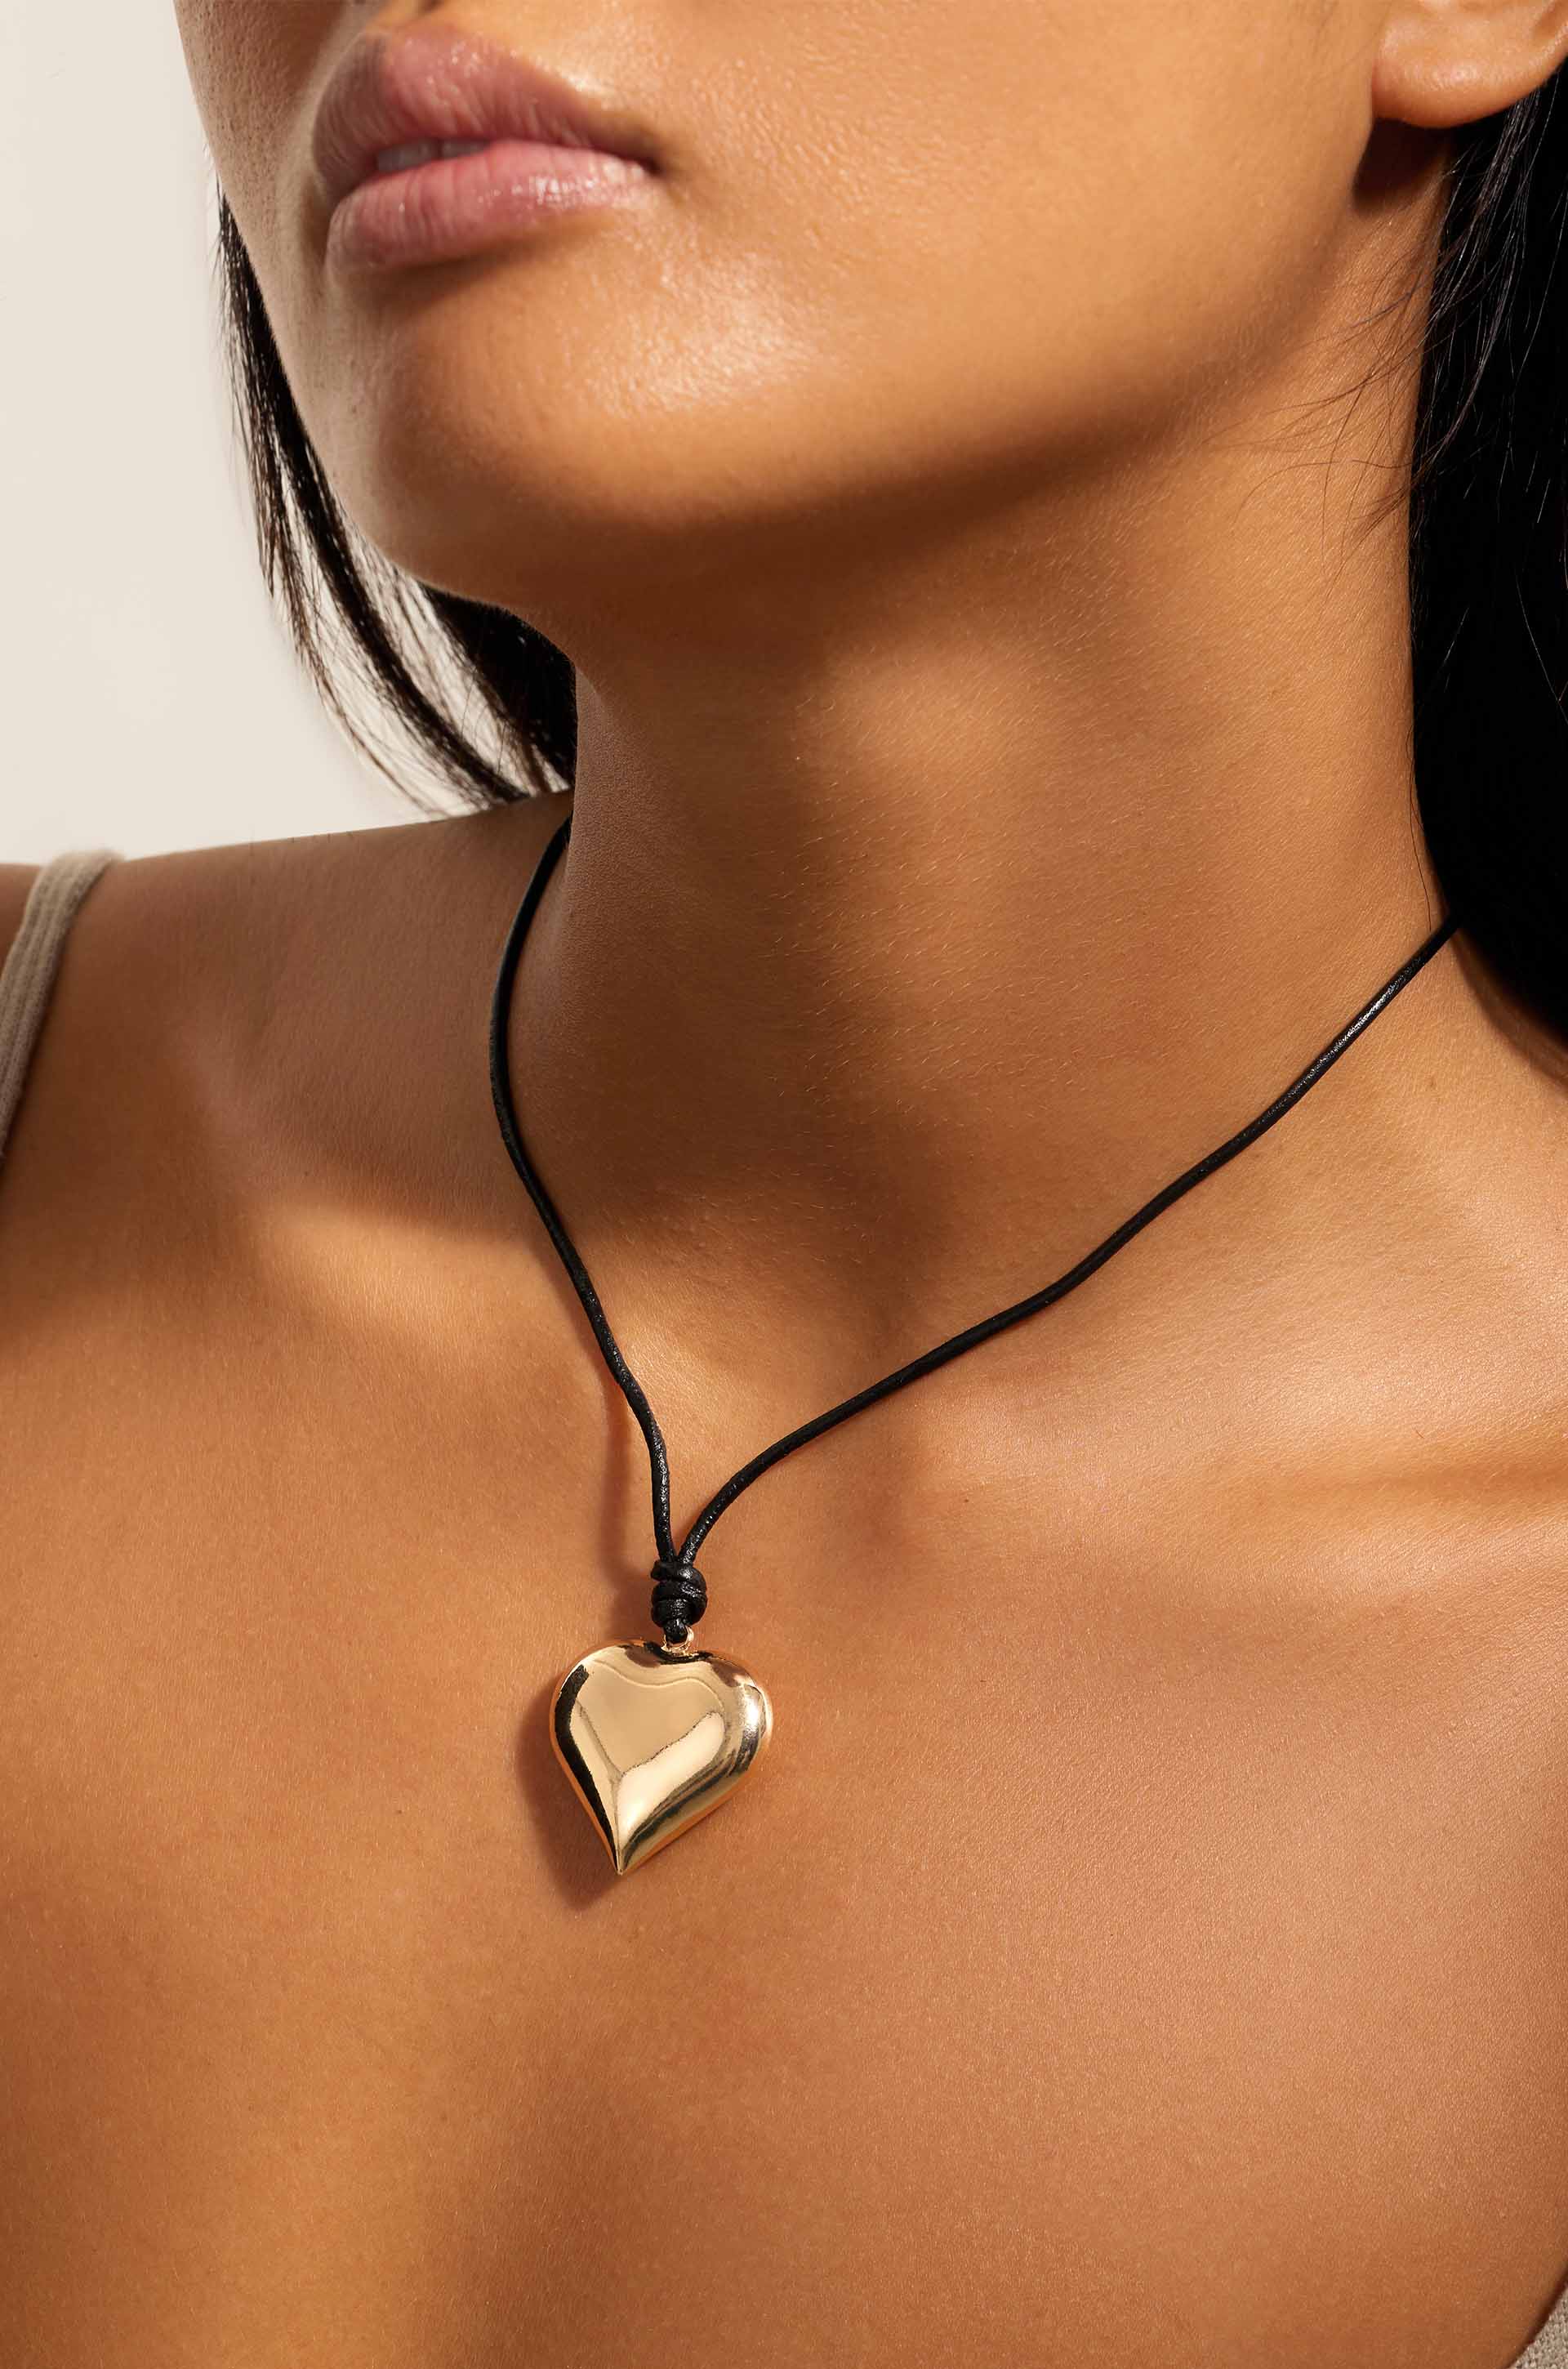 18k Gold Plated Heart Pendant Adjustable Cord Necklace